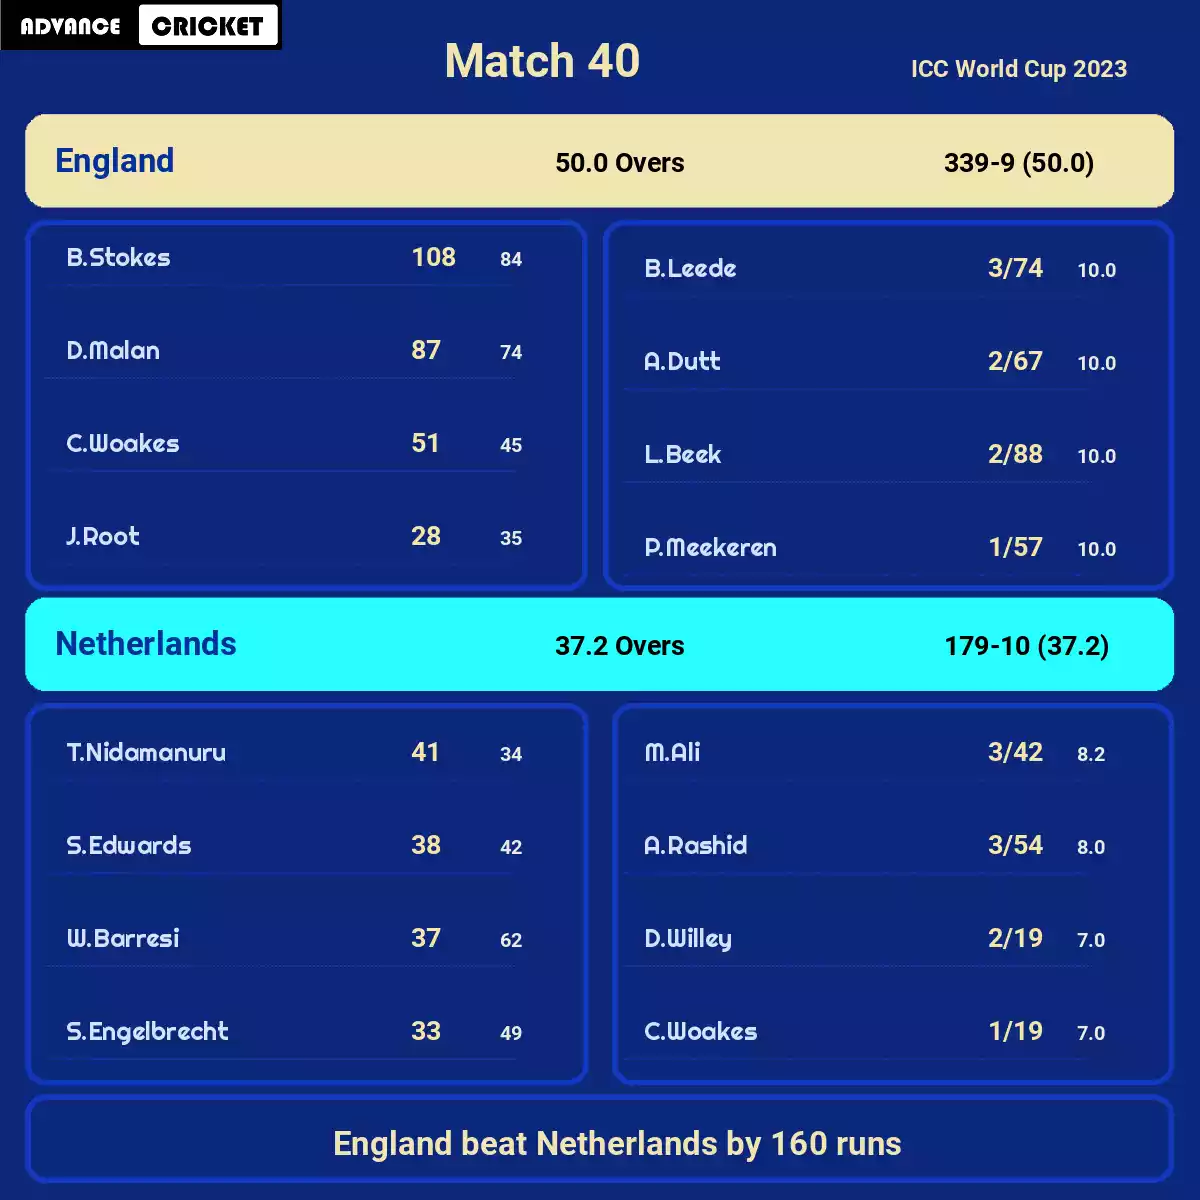 ENG vs NED Match 40 ICC World Cup 2023